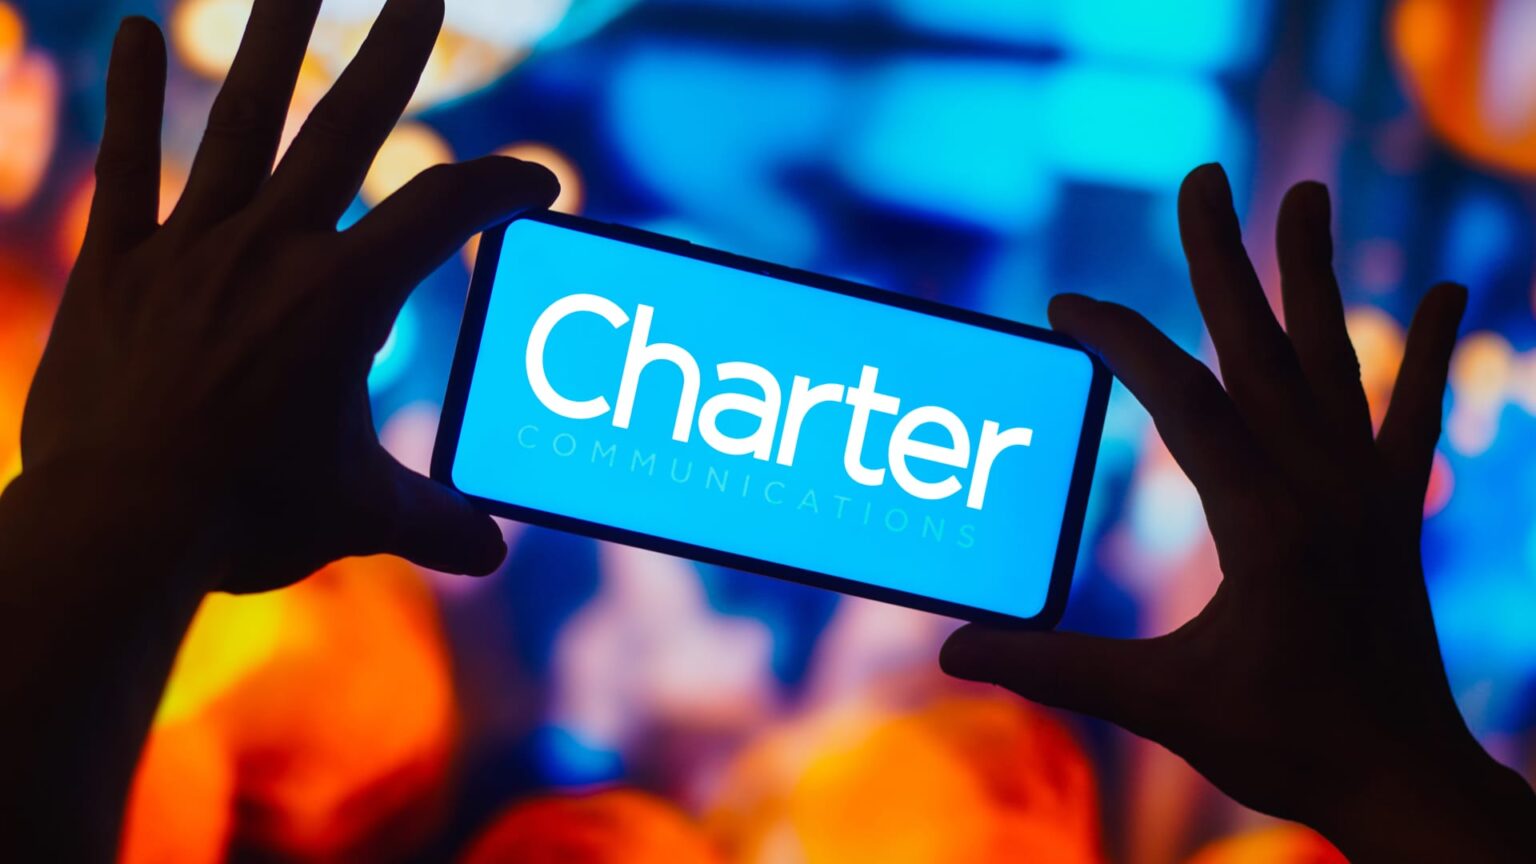 Charter offers a cheaper option for sportlite cable TV